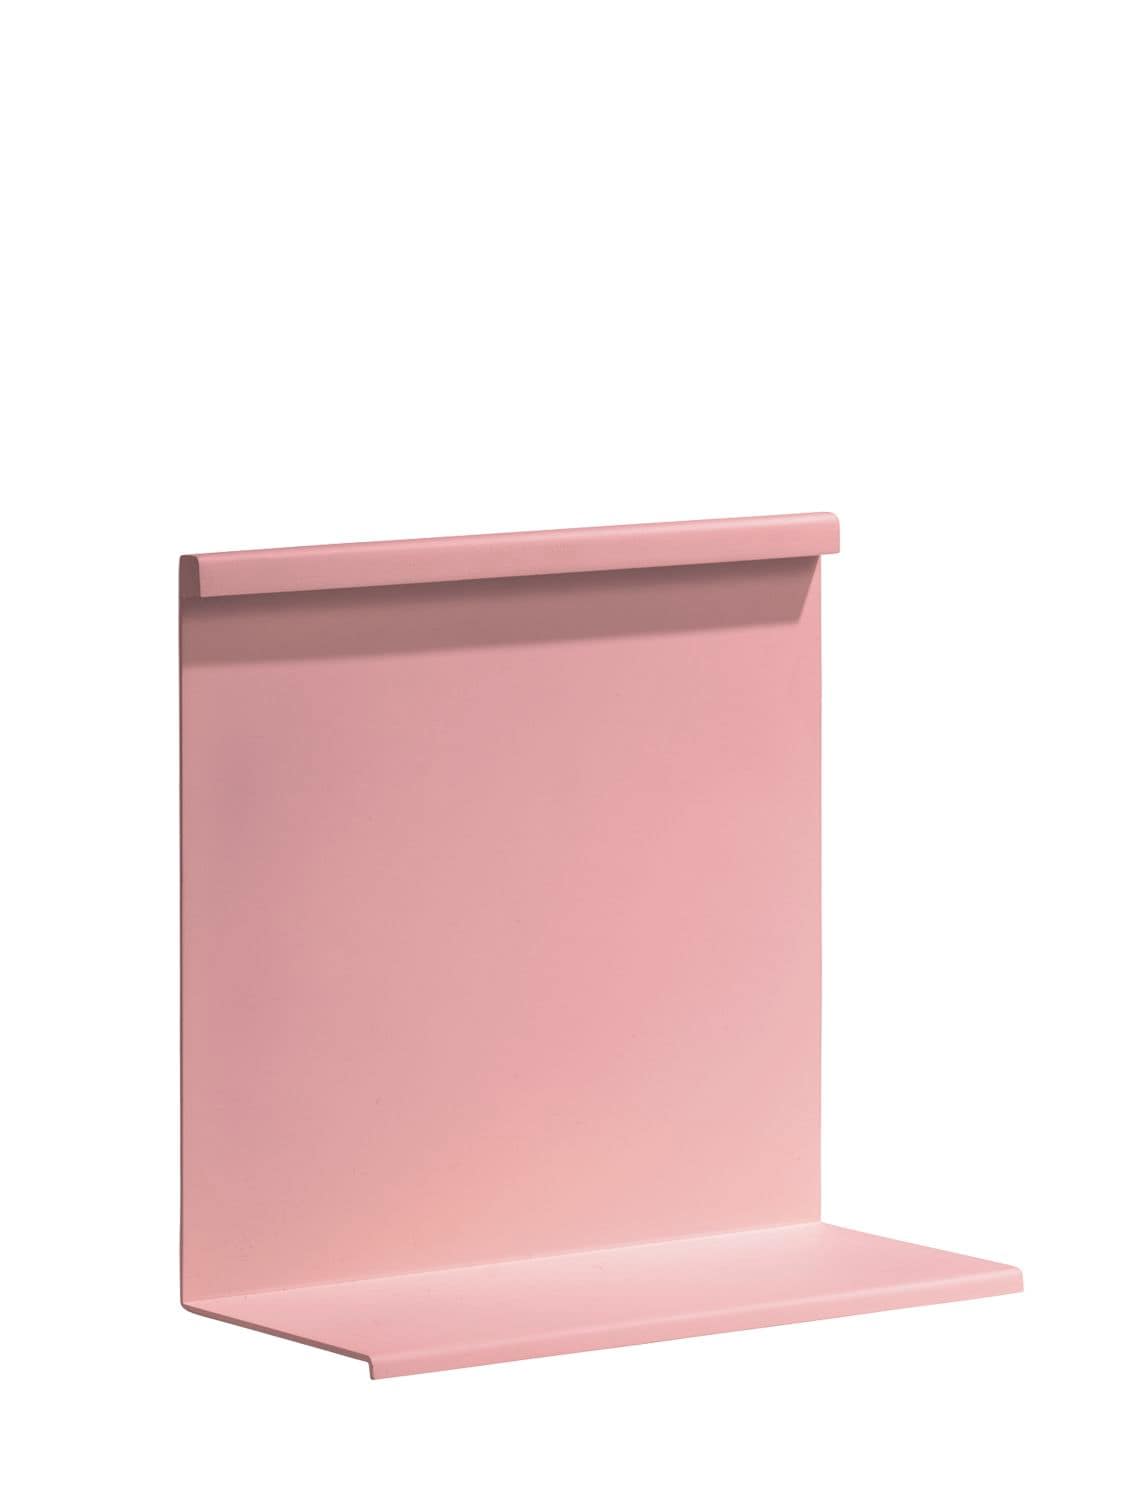 Hay Lbm Table Lamp In Pink